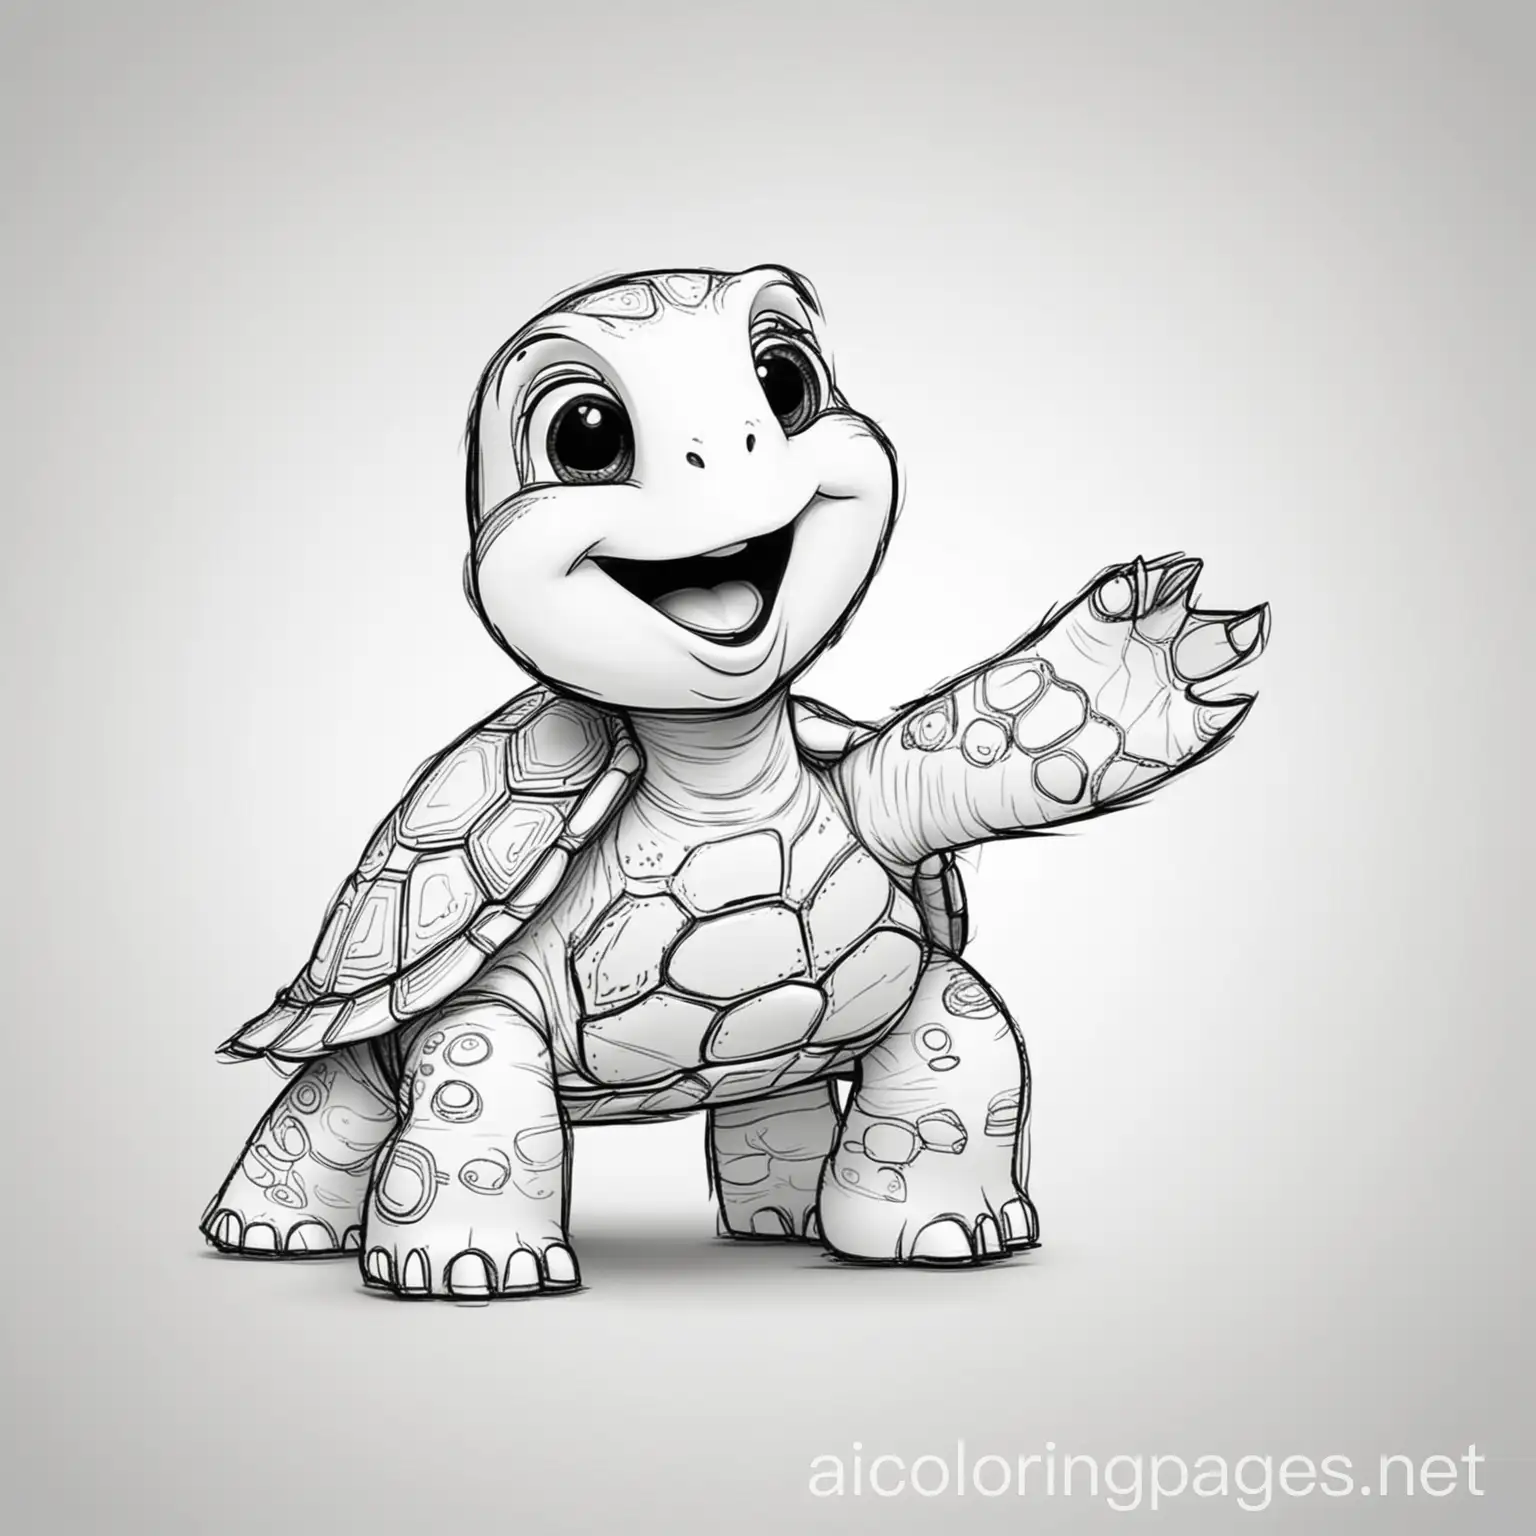 Happy-Funny-Cartoon-Turtle-Coloring-Page-with-Simplicity-and-Ample-White-Space